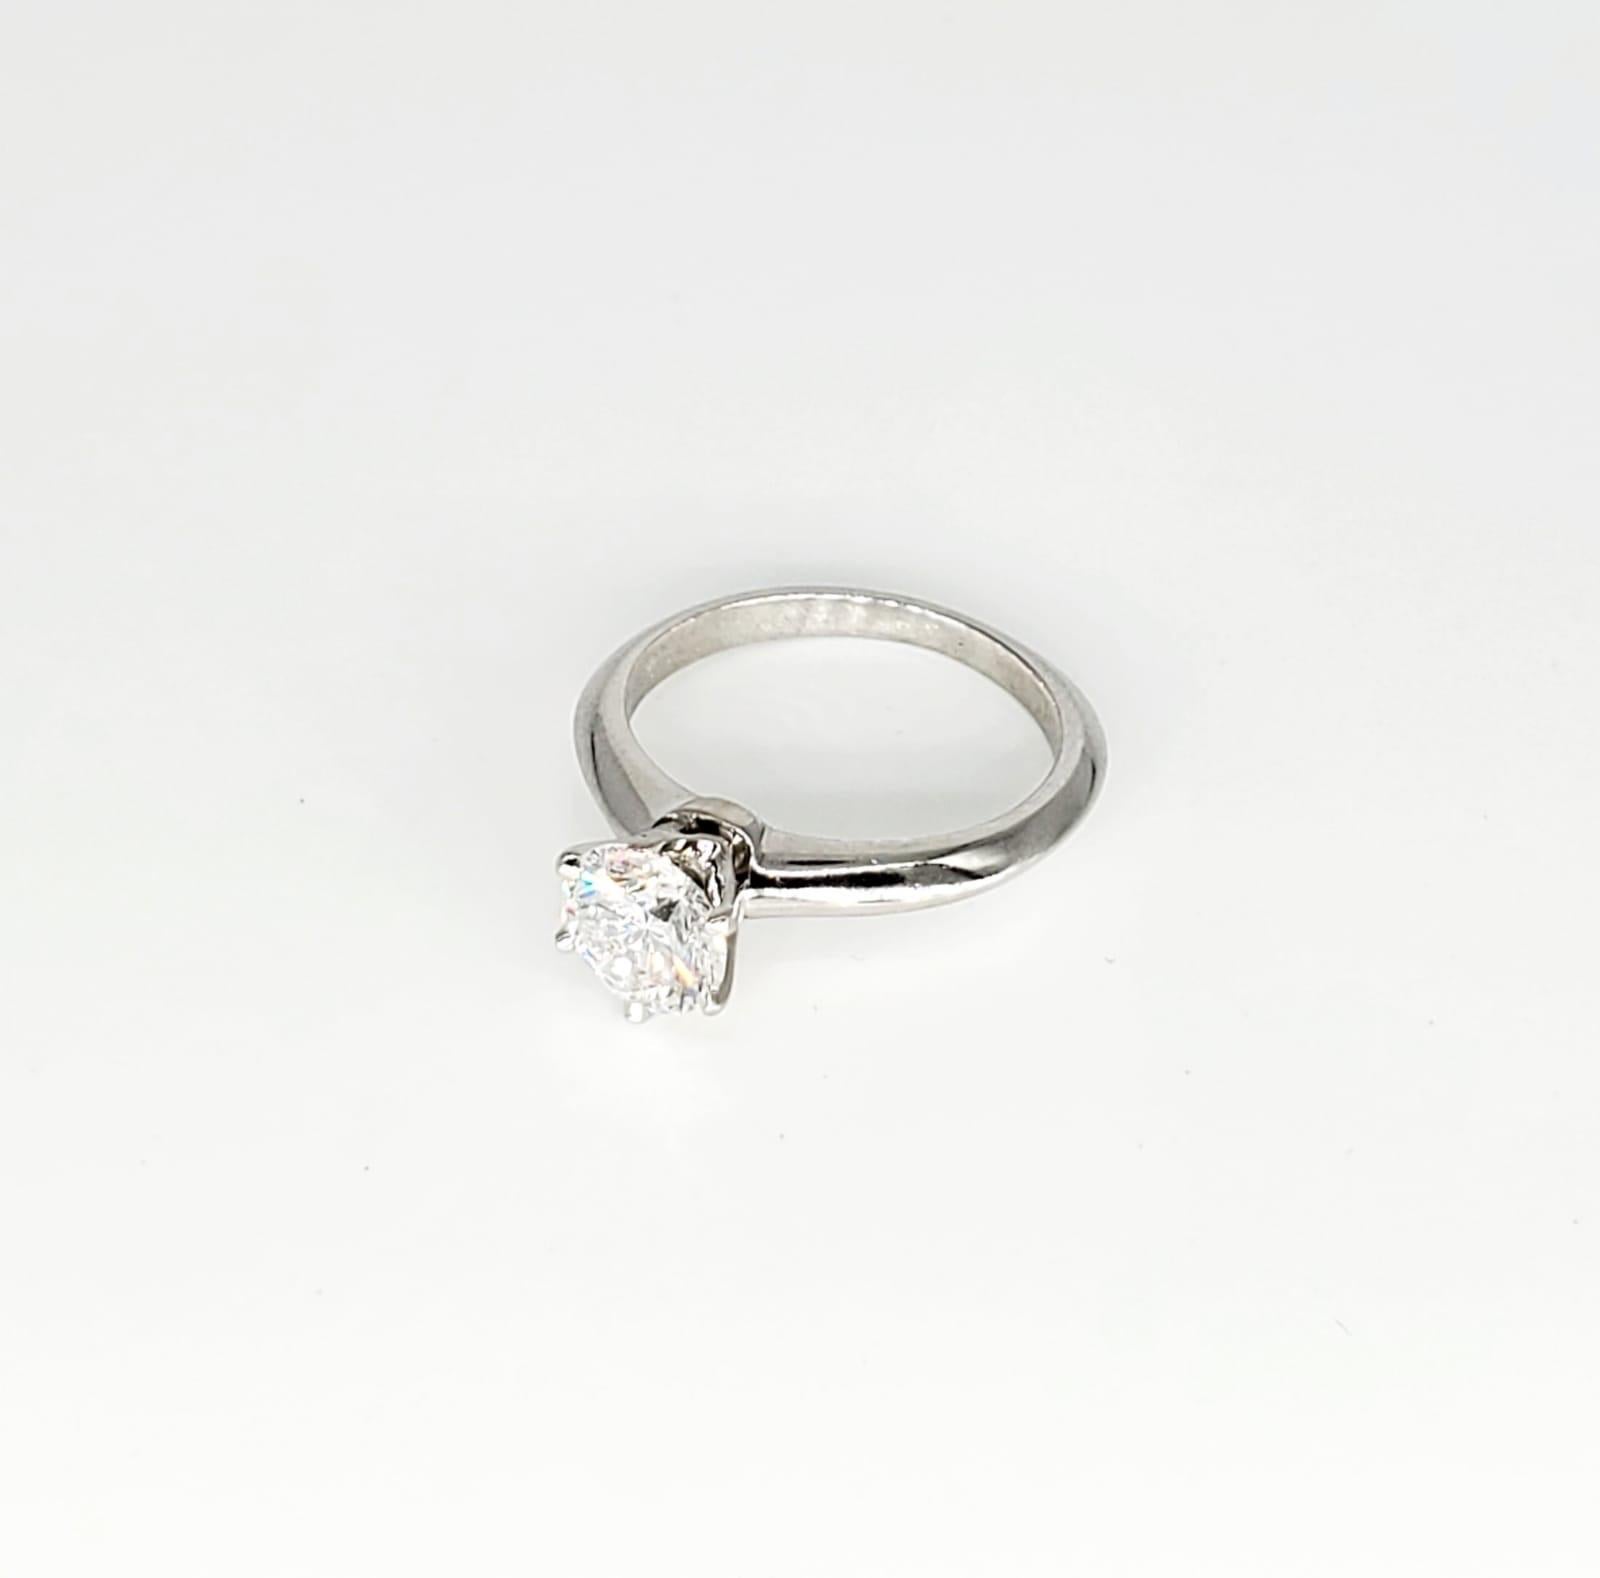 Tiffany & Co. Setting 1.02 Carat F/VVS1 Diamond Engagement Ring in Platinum In Excellent Condition For Sale In Miami, FL